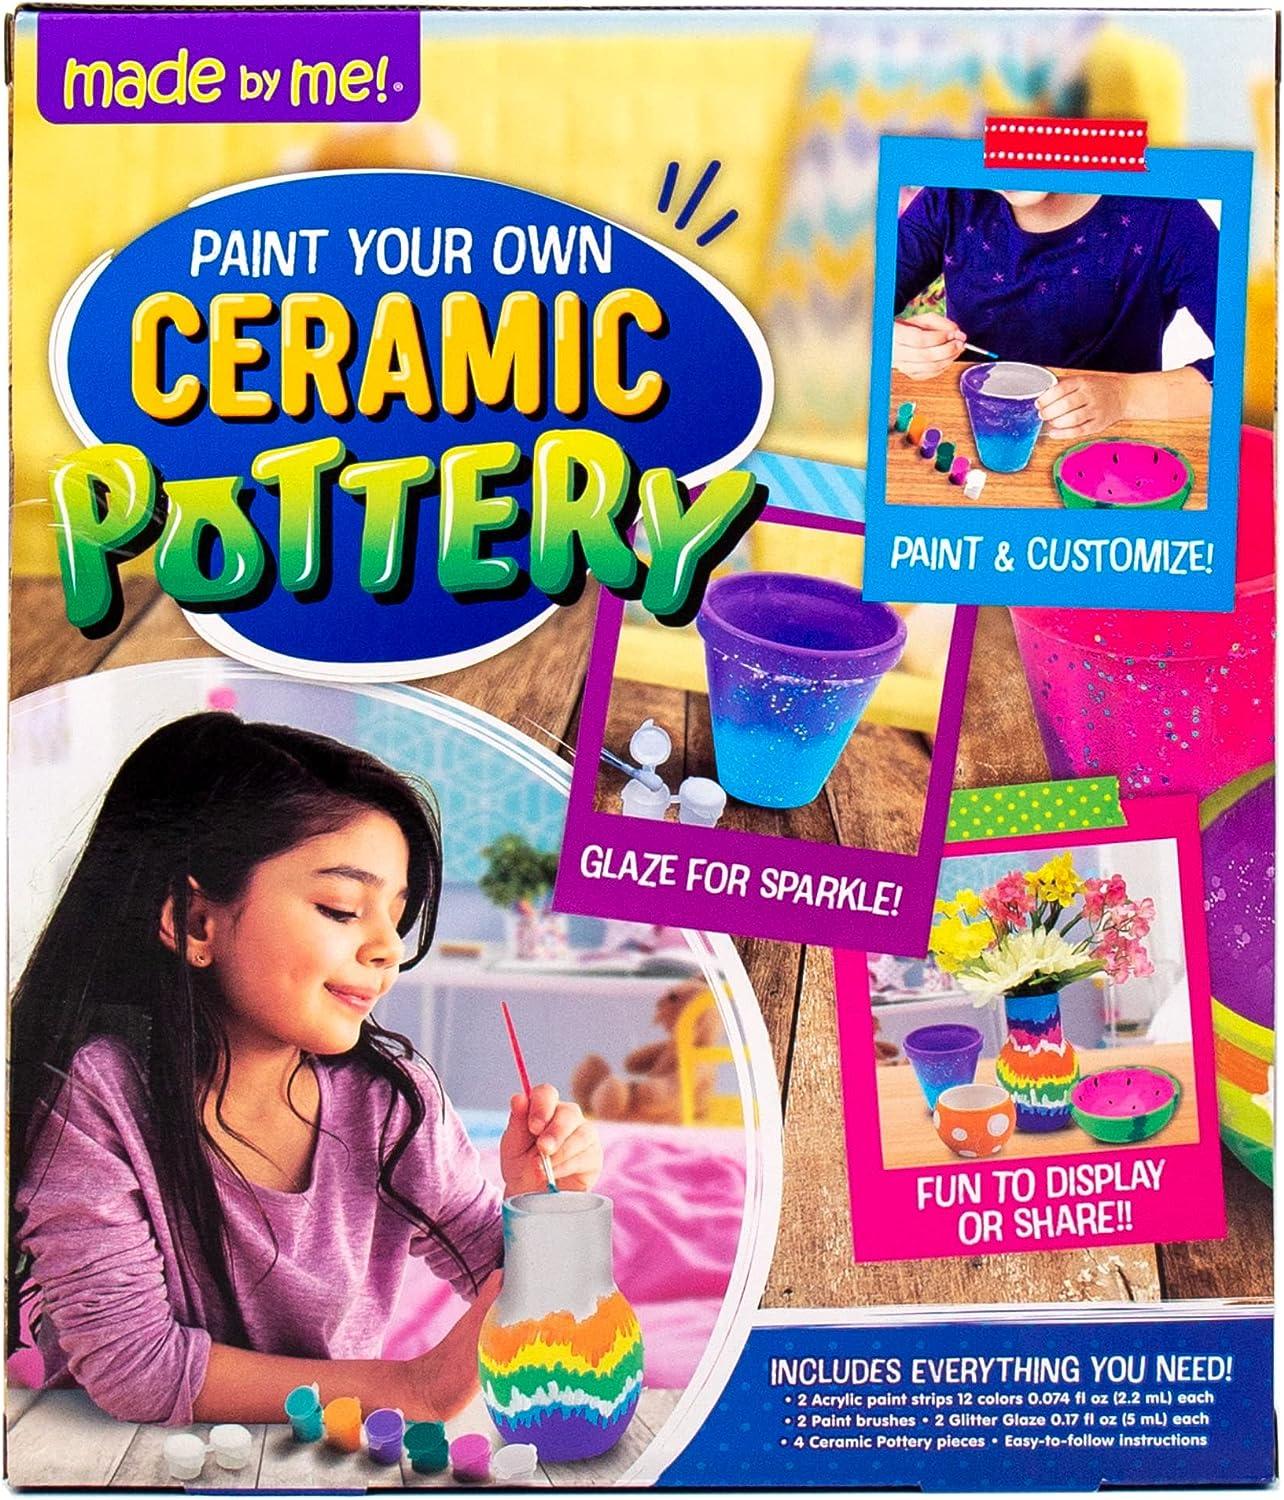 Made By Me Paint Your Own Ceramic Pottery Fun Ceramic Painting Kit for Kids Paint  Your Own Ceramic Pottery Dish Flower Pot Vase & Bowl Great Staycation  Activity for Kids Ages 6